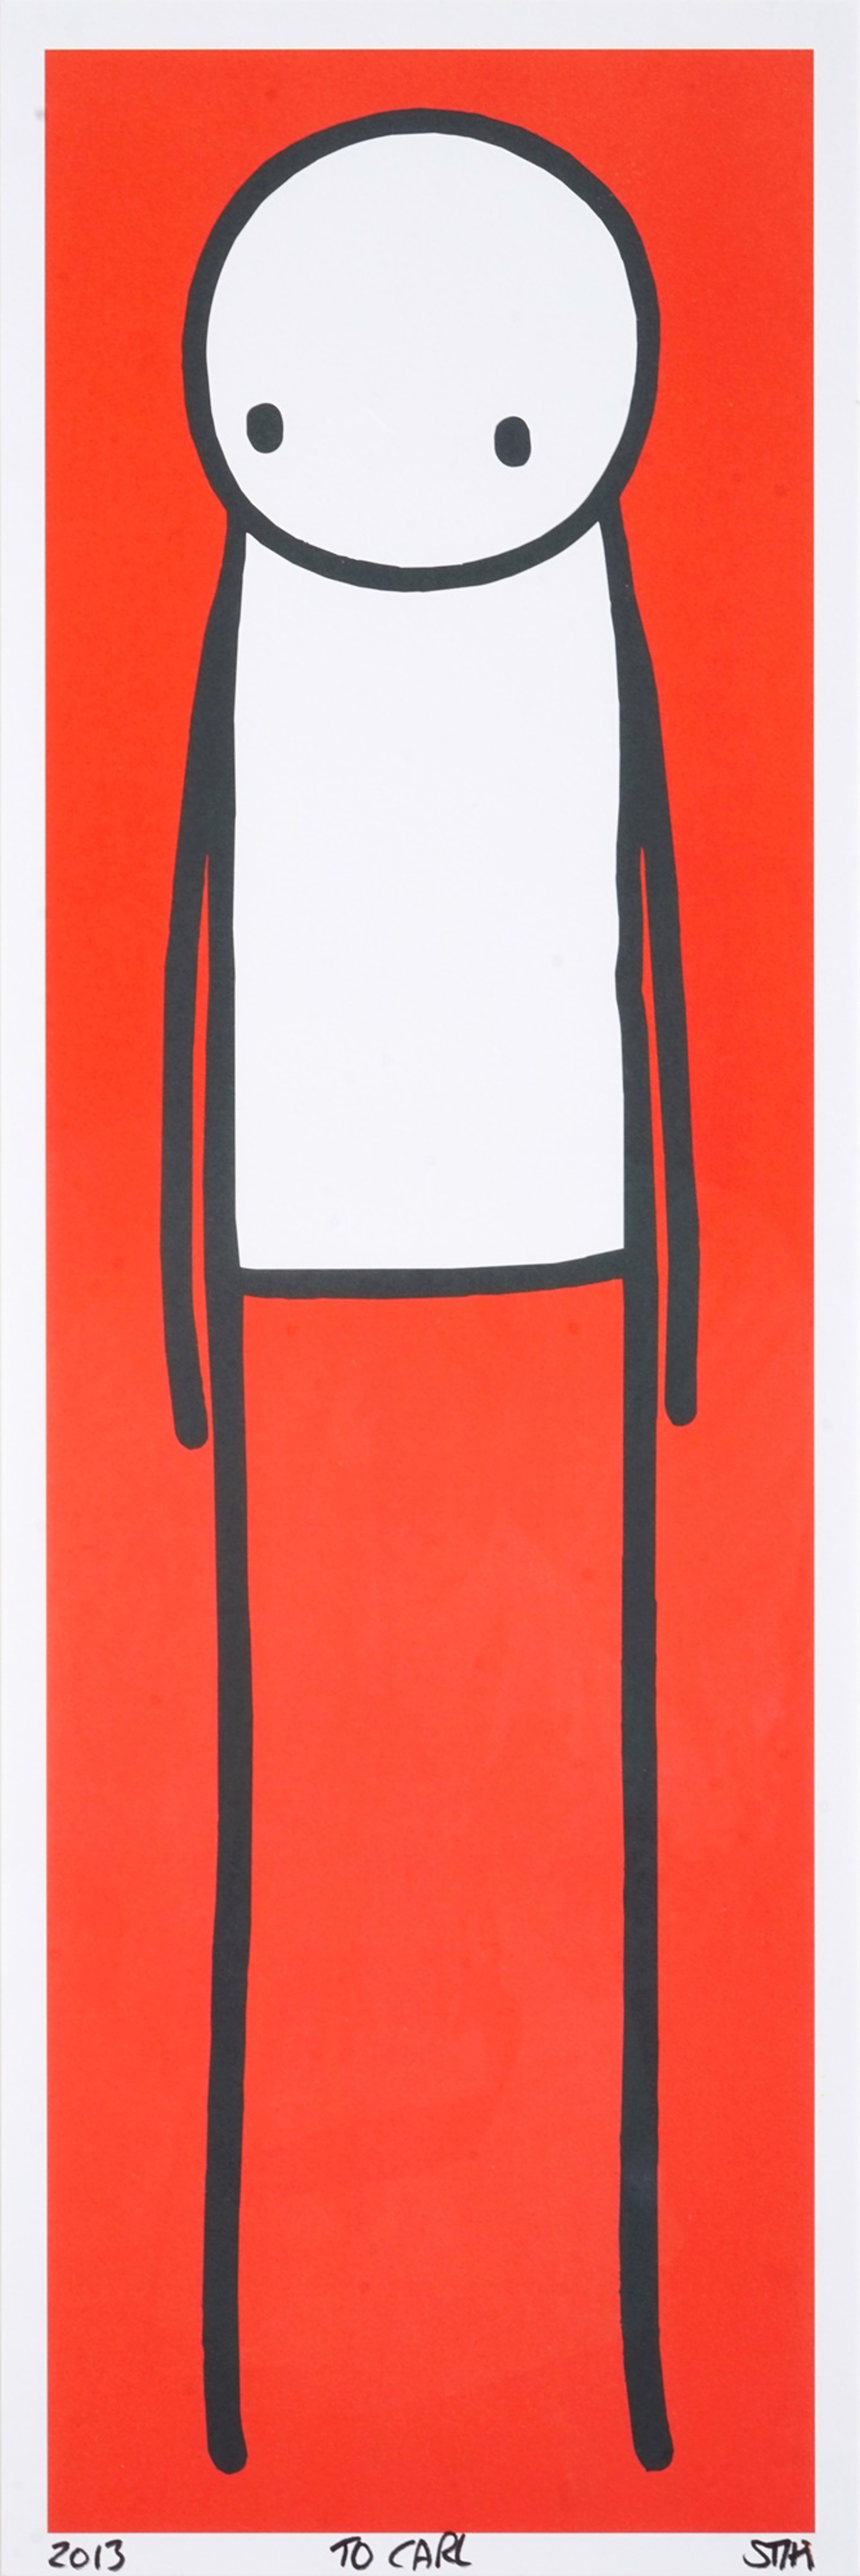 Standing Figure (Unfolded UK Big Issue Red) by Stik